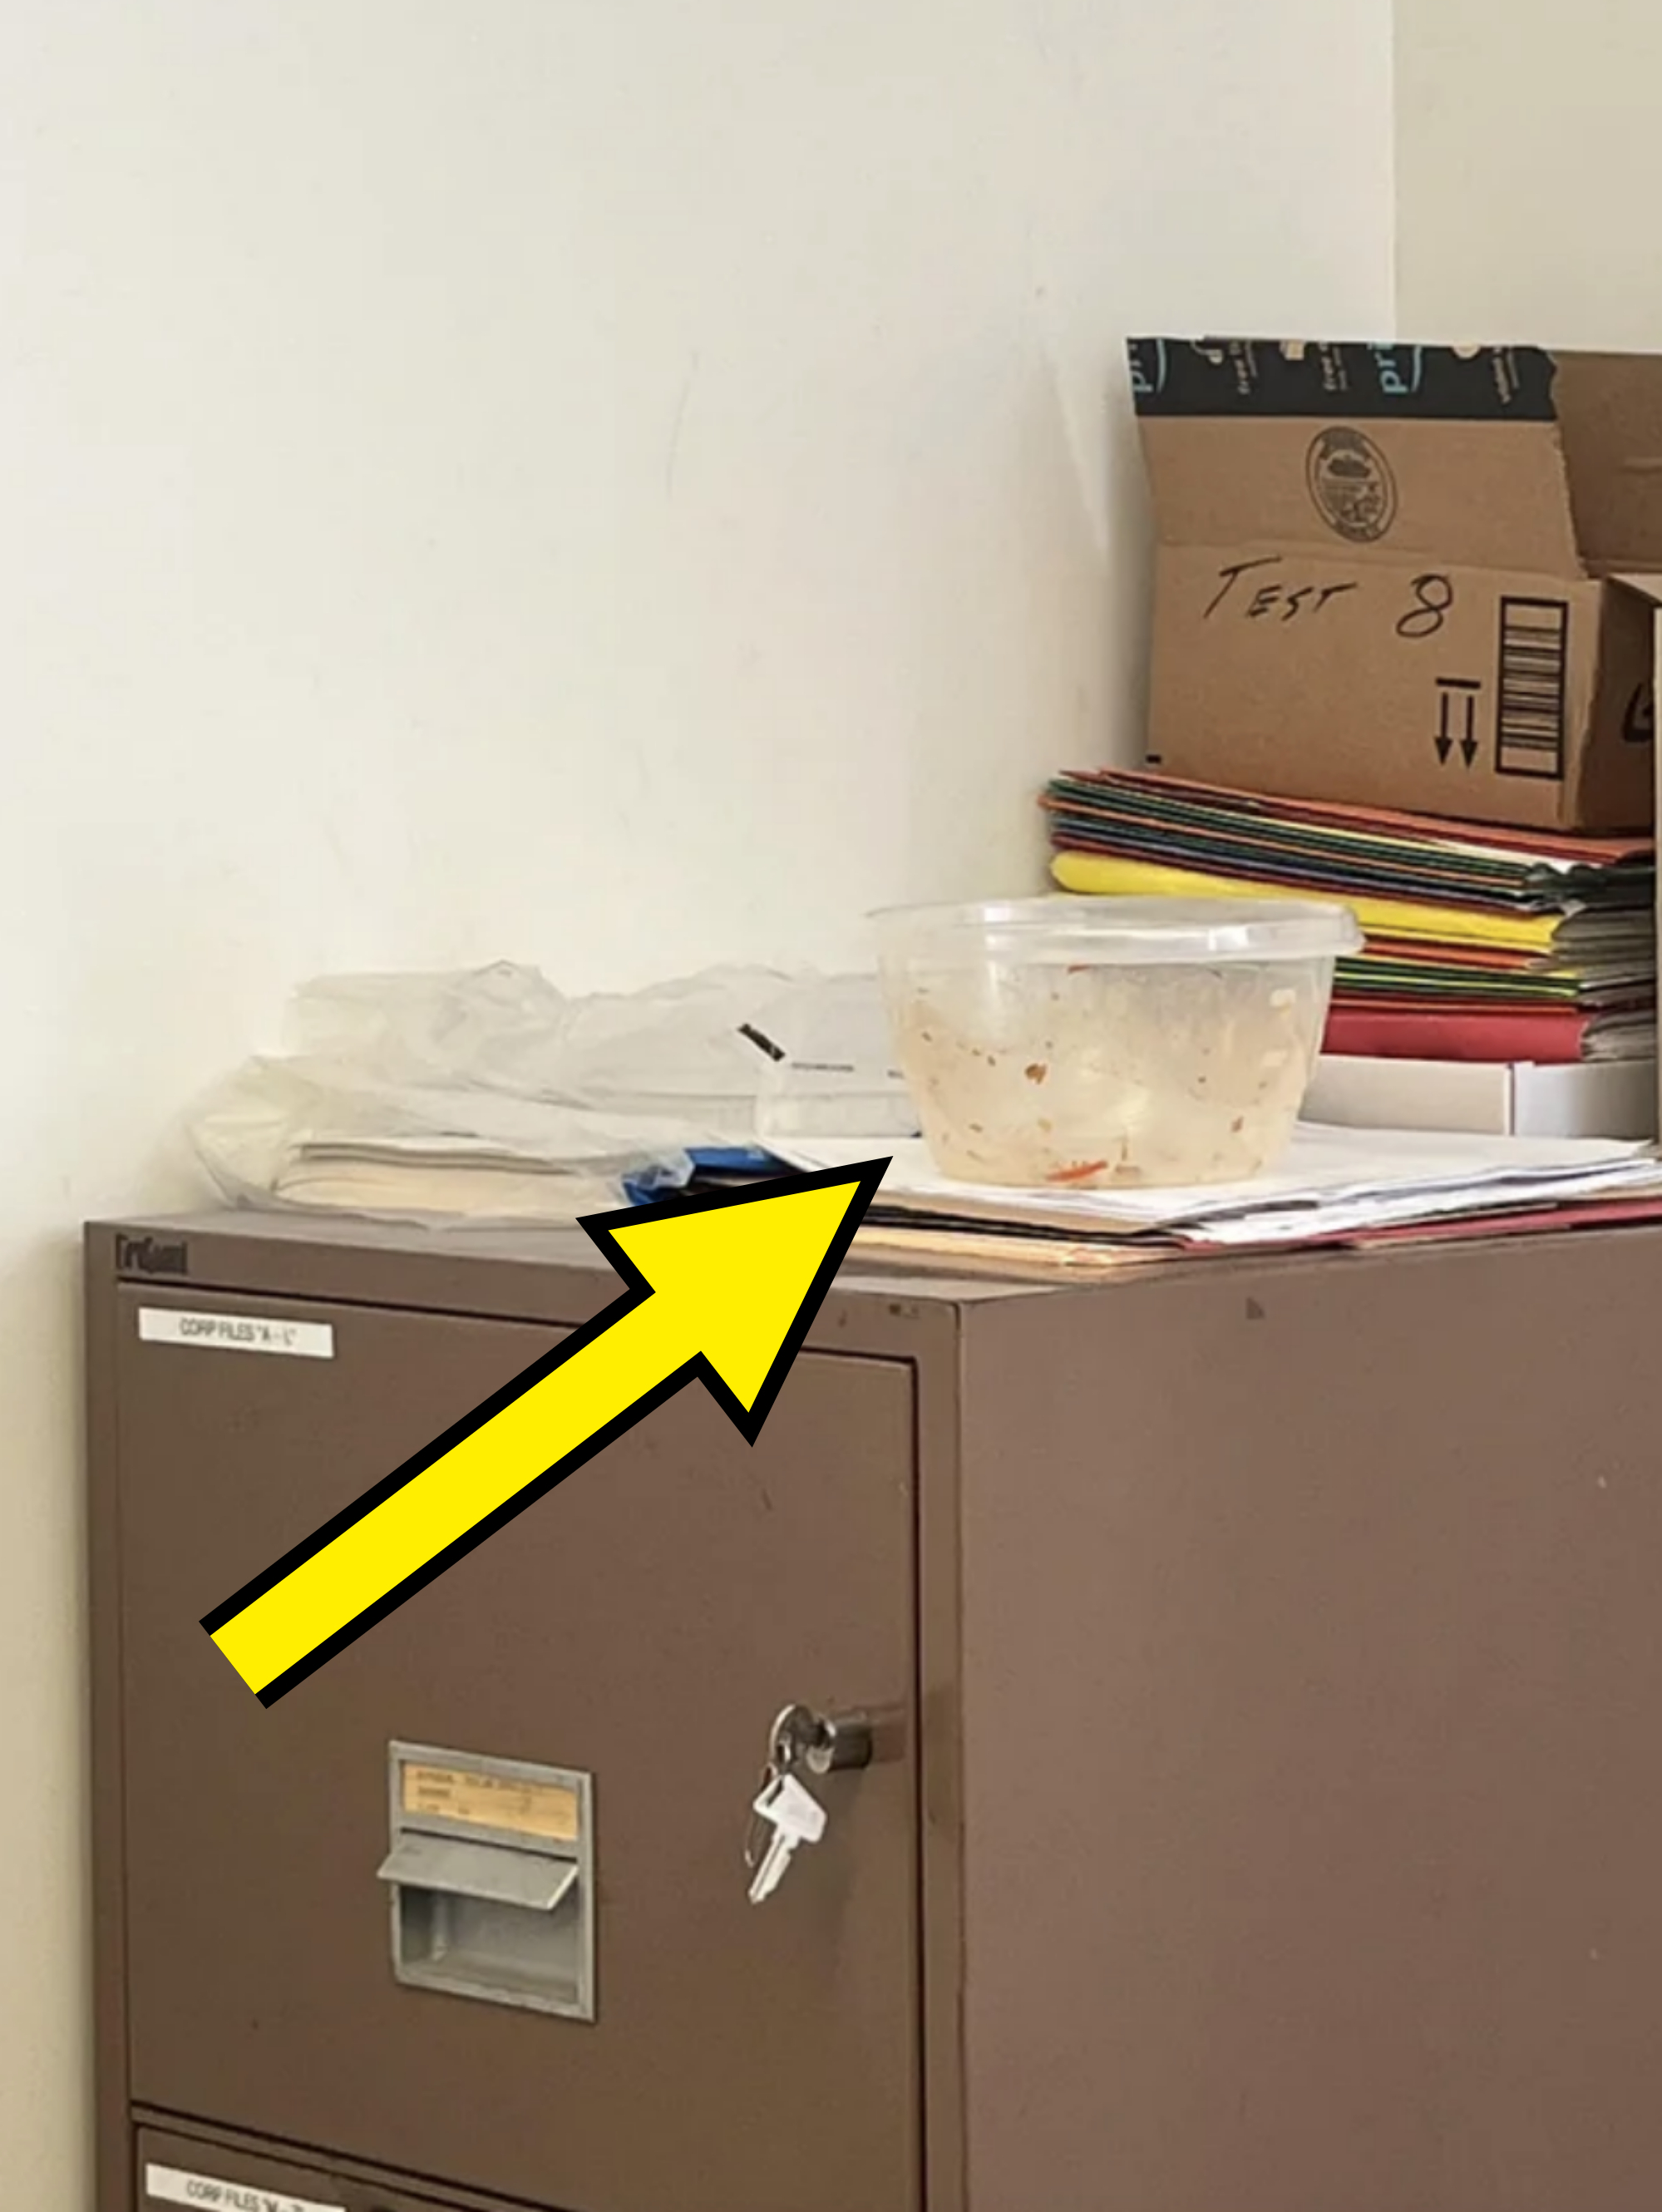 An empty, dirty Tupperware container has been left on top of the office&#x27;s filing cabinets